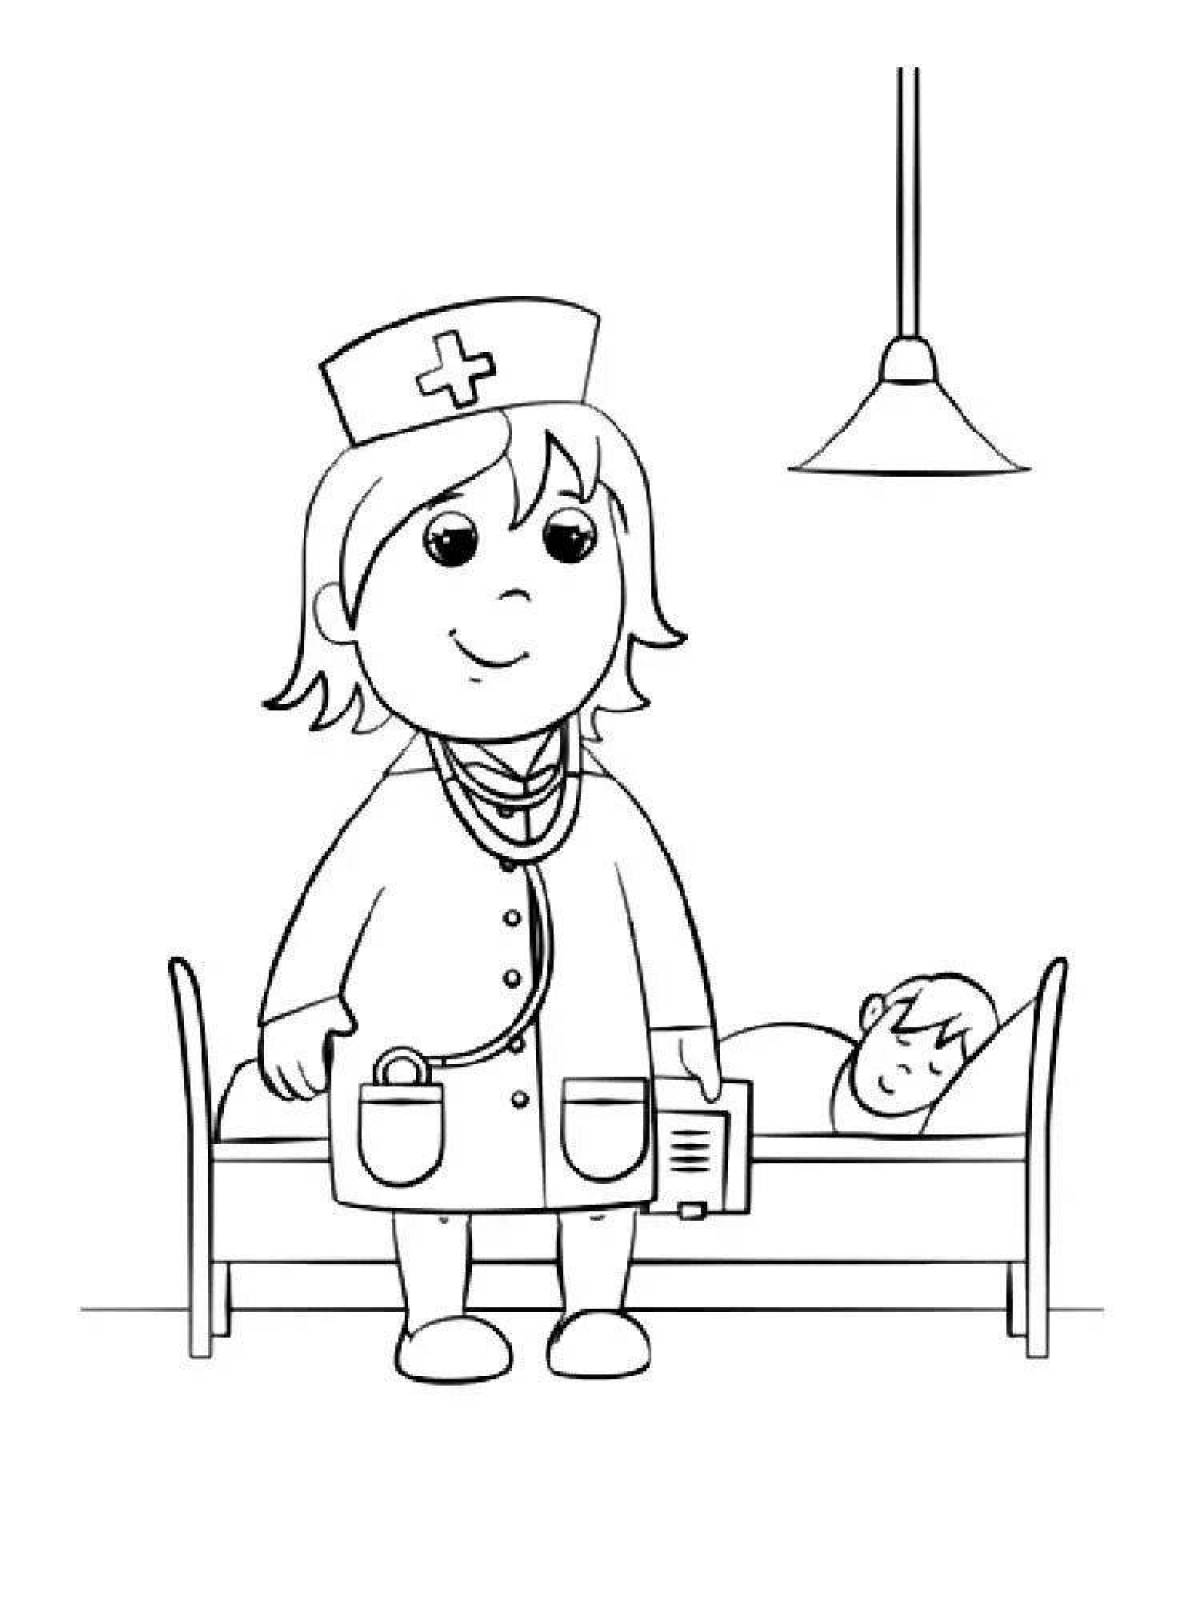 Bright doctor profession coloring page